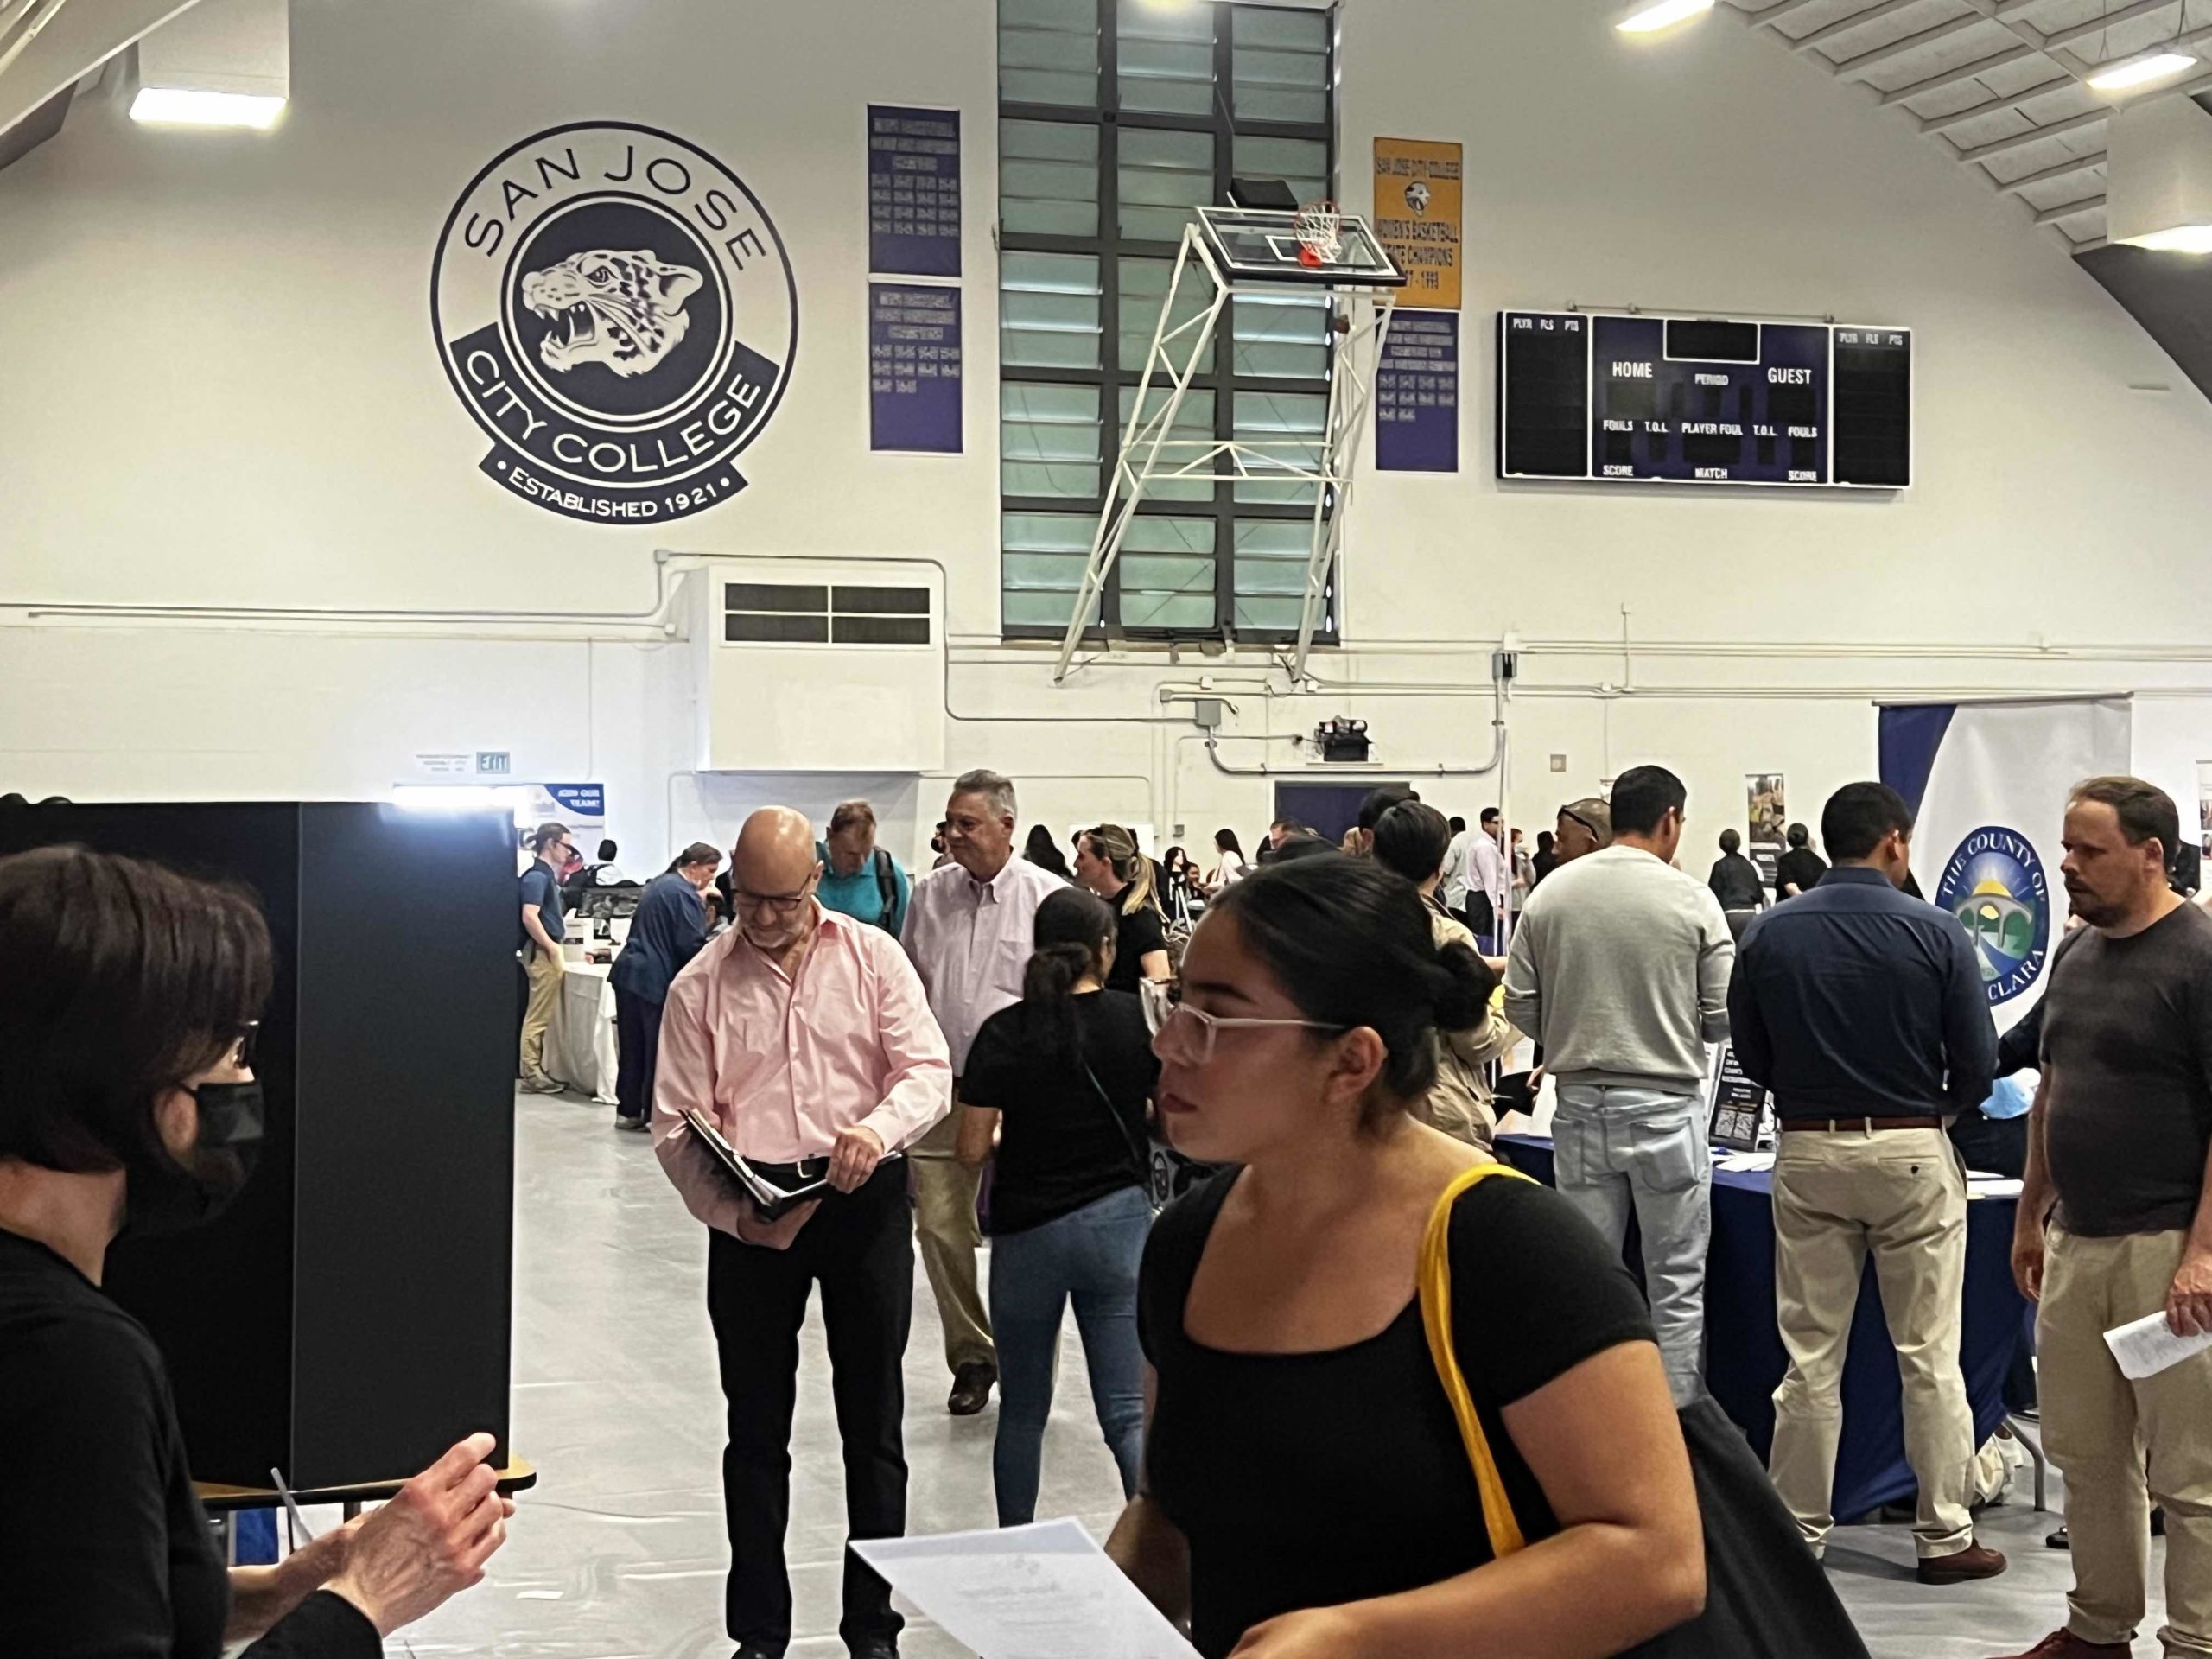 Attendees are actively networking with potential recruiters at the biannual spring career fair at San Jose City College, on April 25.